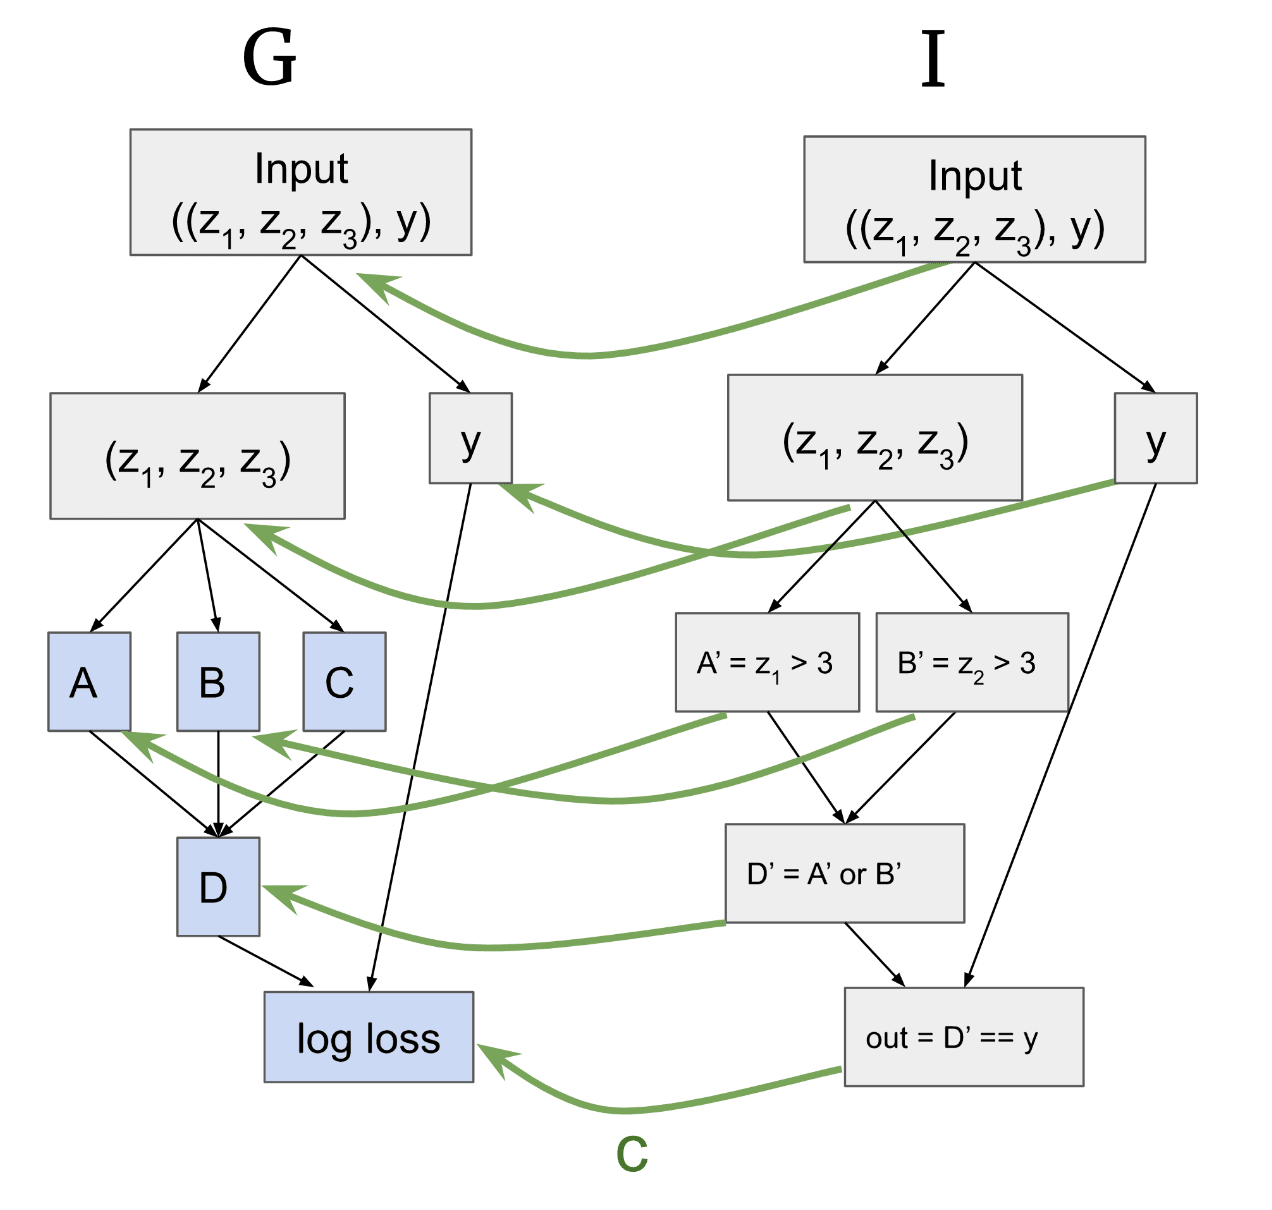 An example of Causal Scrubbing with graph $G$ on the left and the interpretation graph $I$ on the right. Image is taken from the CaSc [writeup](https://www.lesswrong.com/s/h95ayYYwMebGEYN5y/p/JvZhhzycHu2Yd57RN)